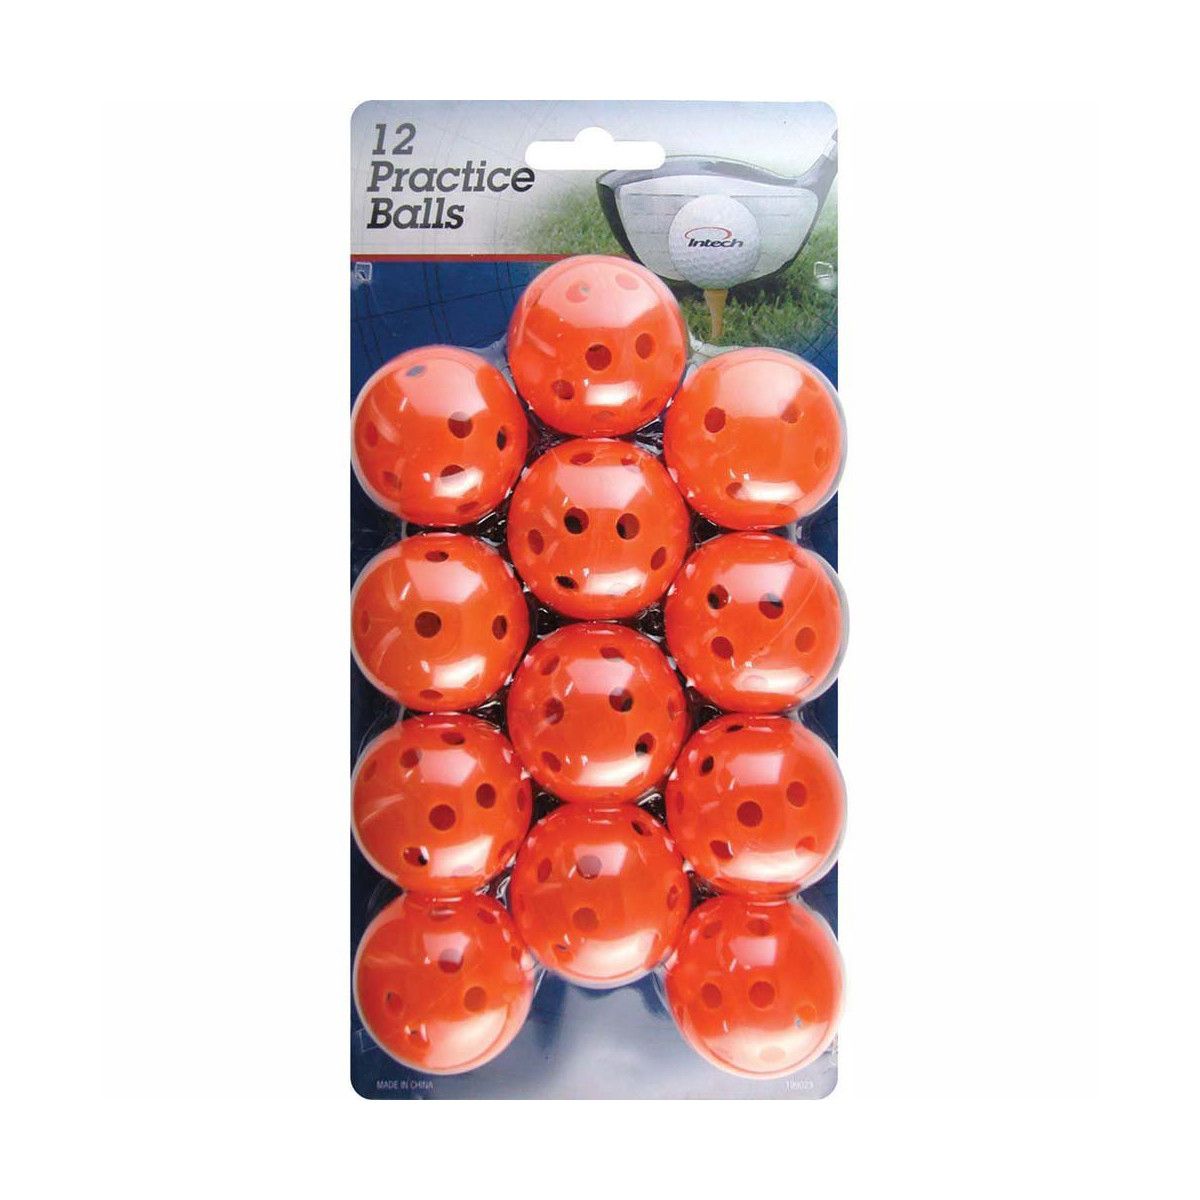 12 orange Intech Practice Golf Balls with Air Holes inside retail packaging